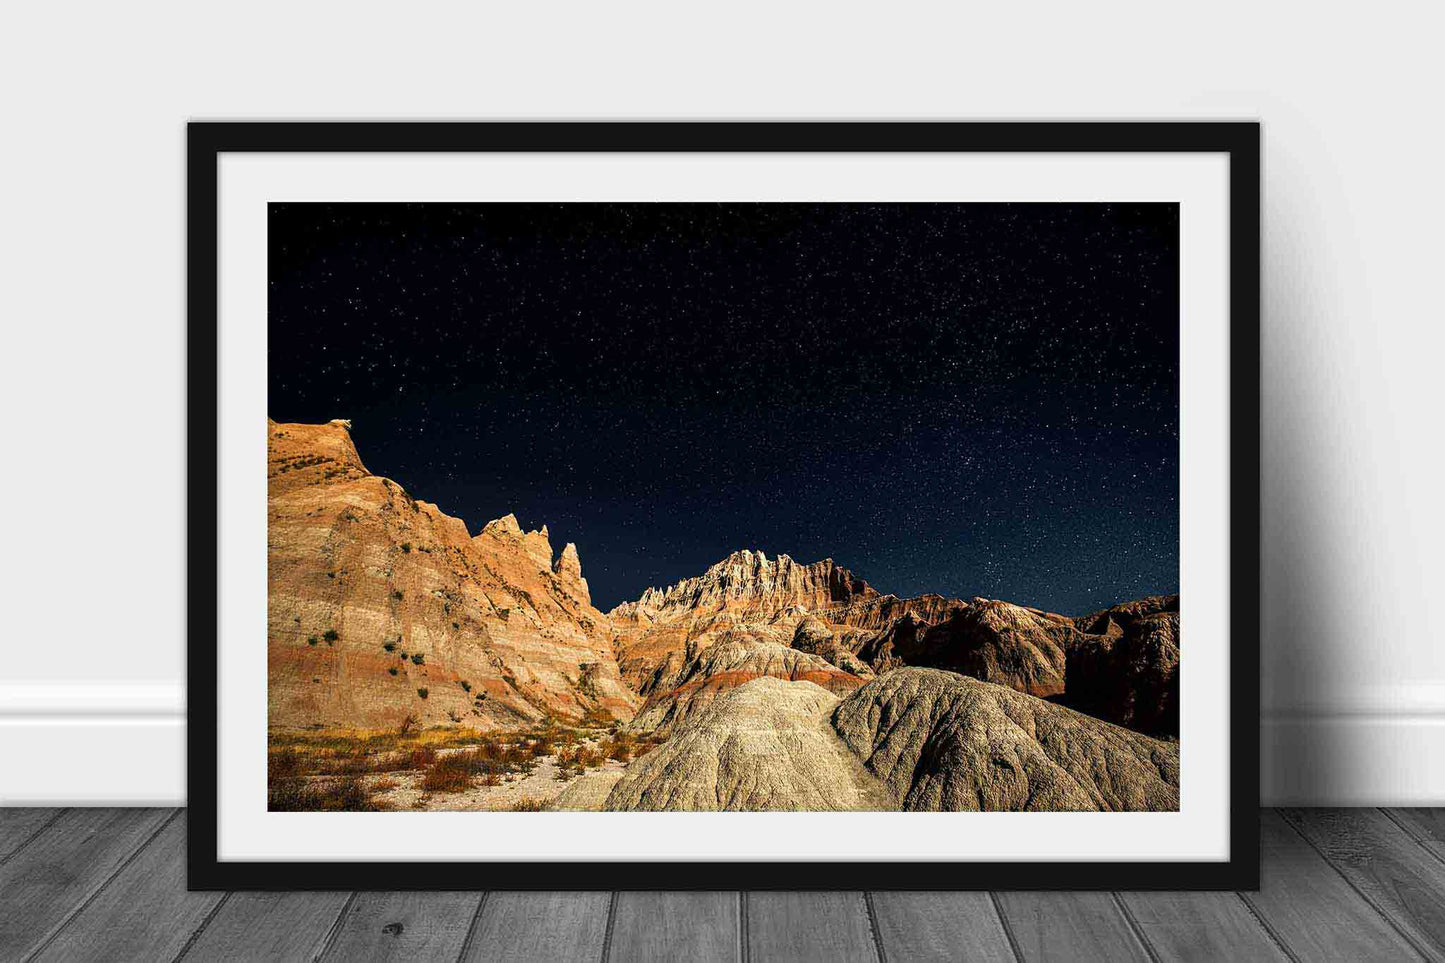 Framed Great Plains print of a starry night sky over pinnacles in Badlands National Park, South Dakota by Sean Ramsey of Southern Plains Photography.